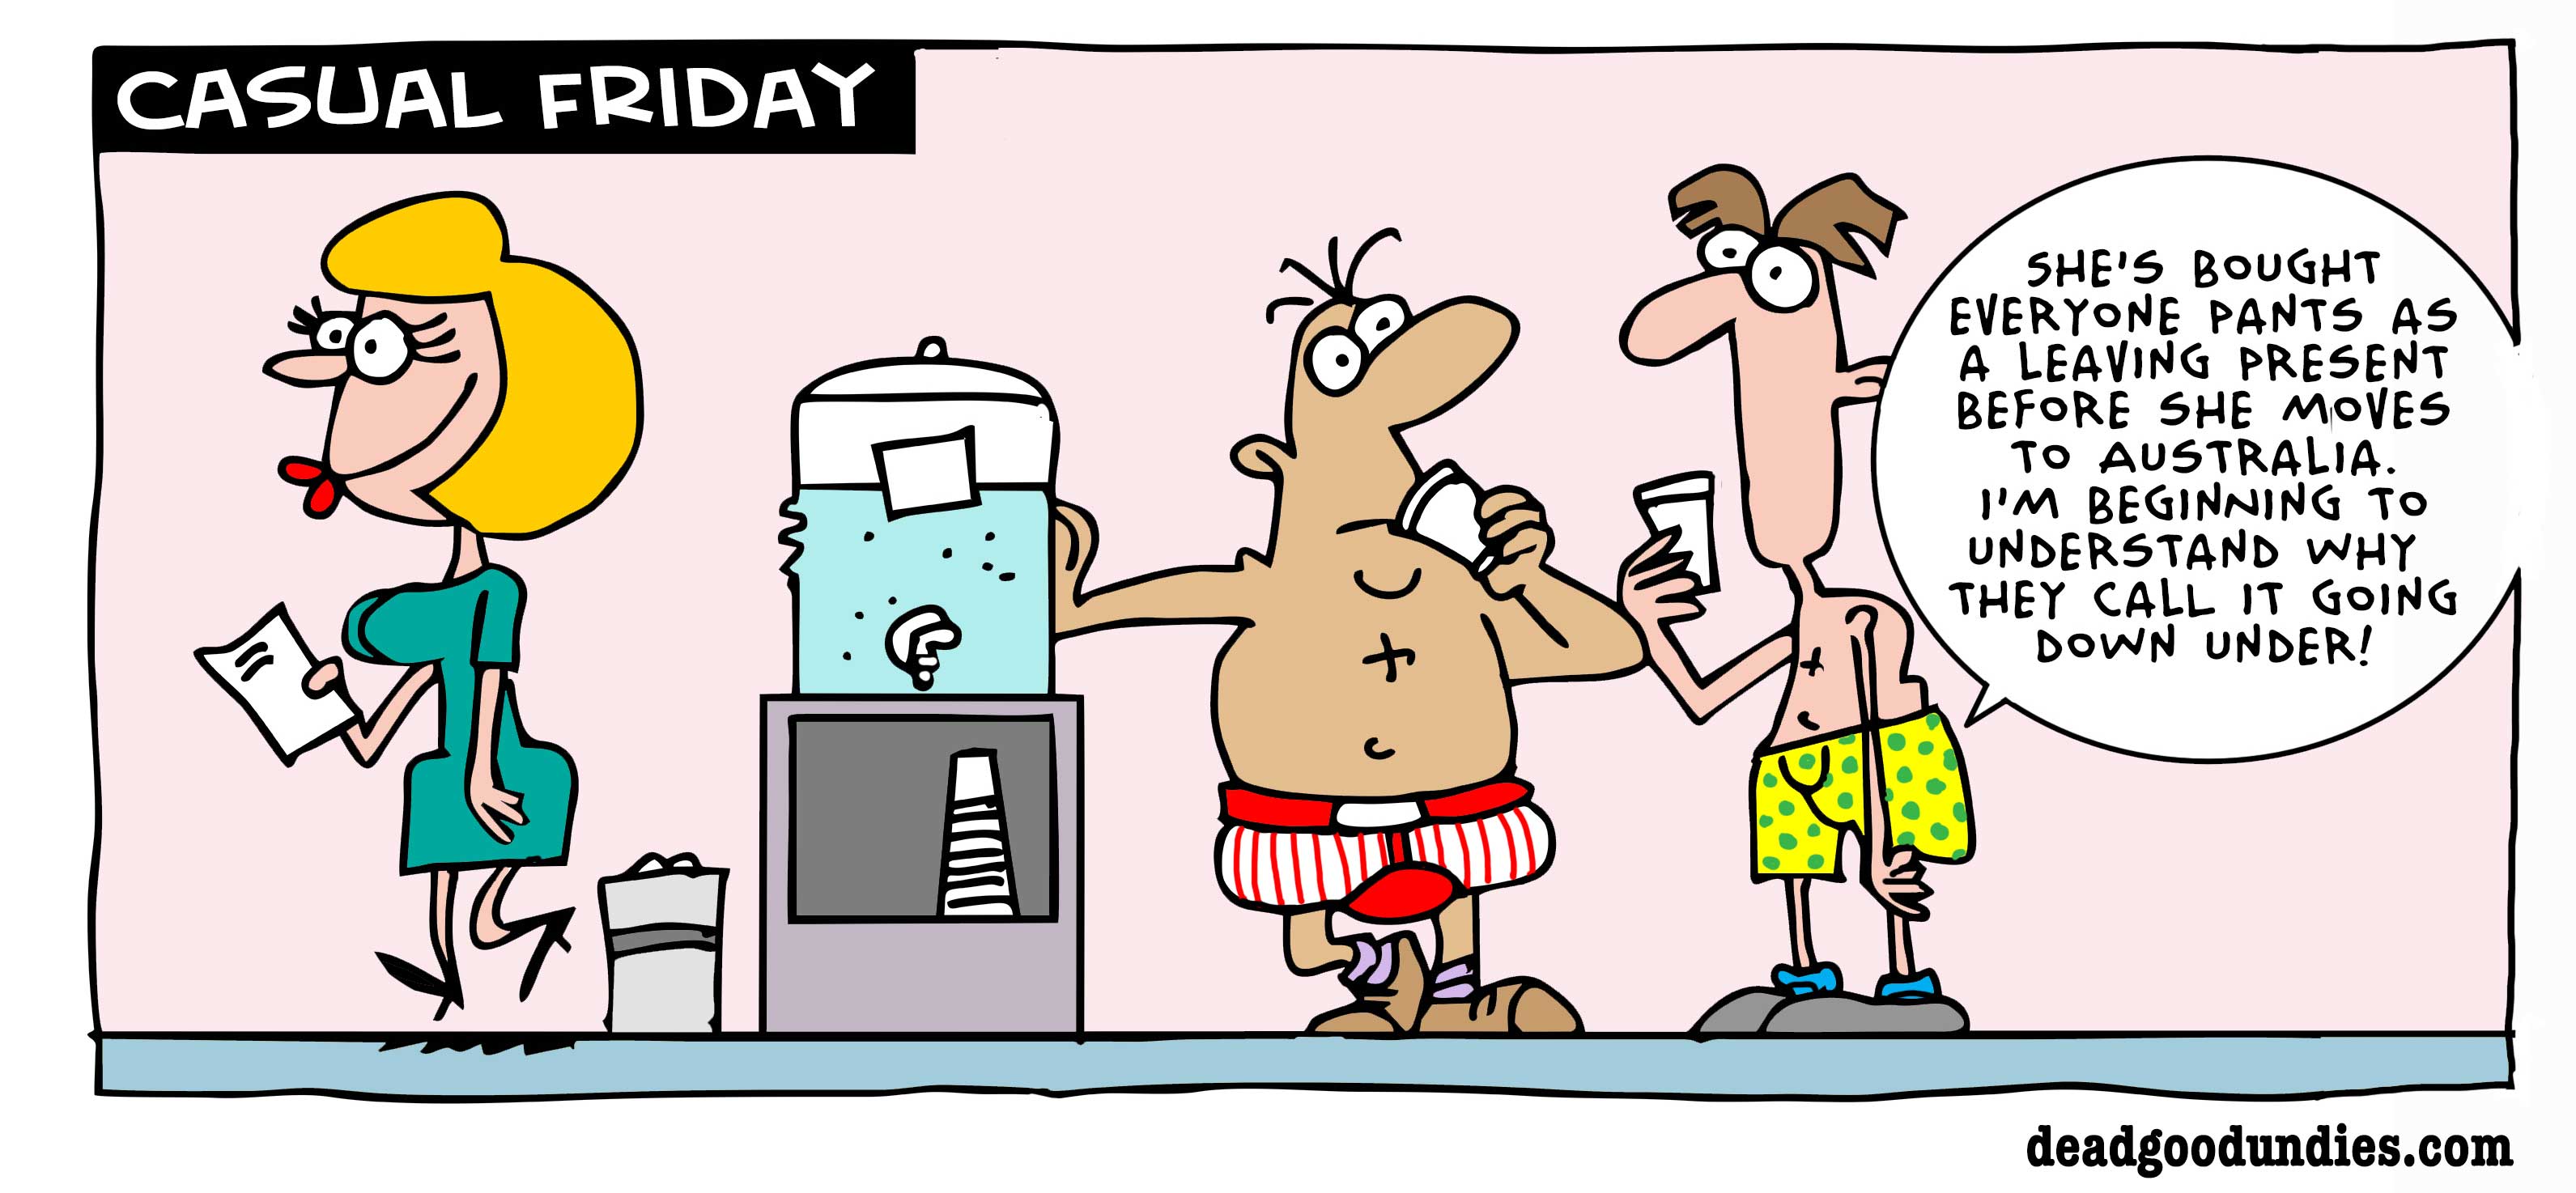 Over the next few weeks, we will be delighting you with some deadgoodundies.com comic strips to feed your funny!